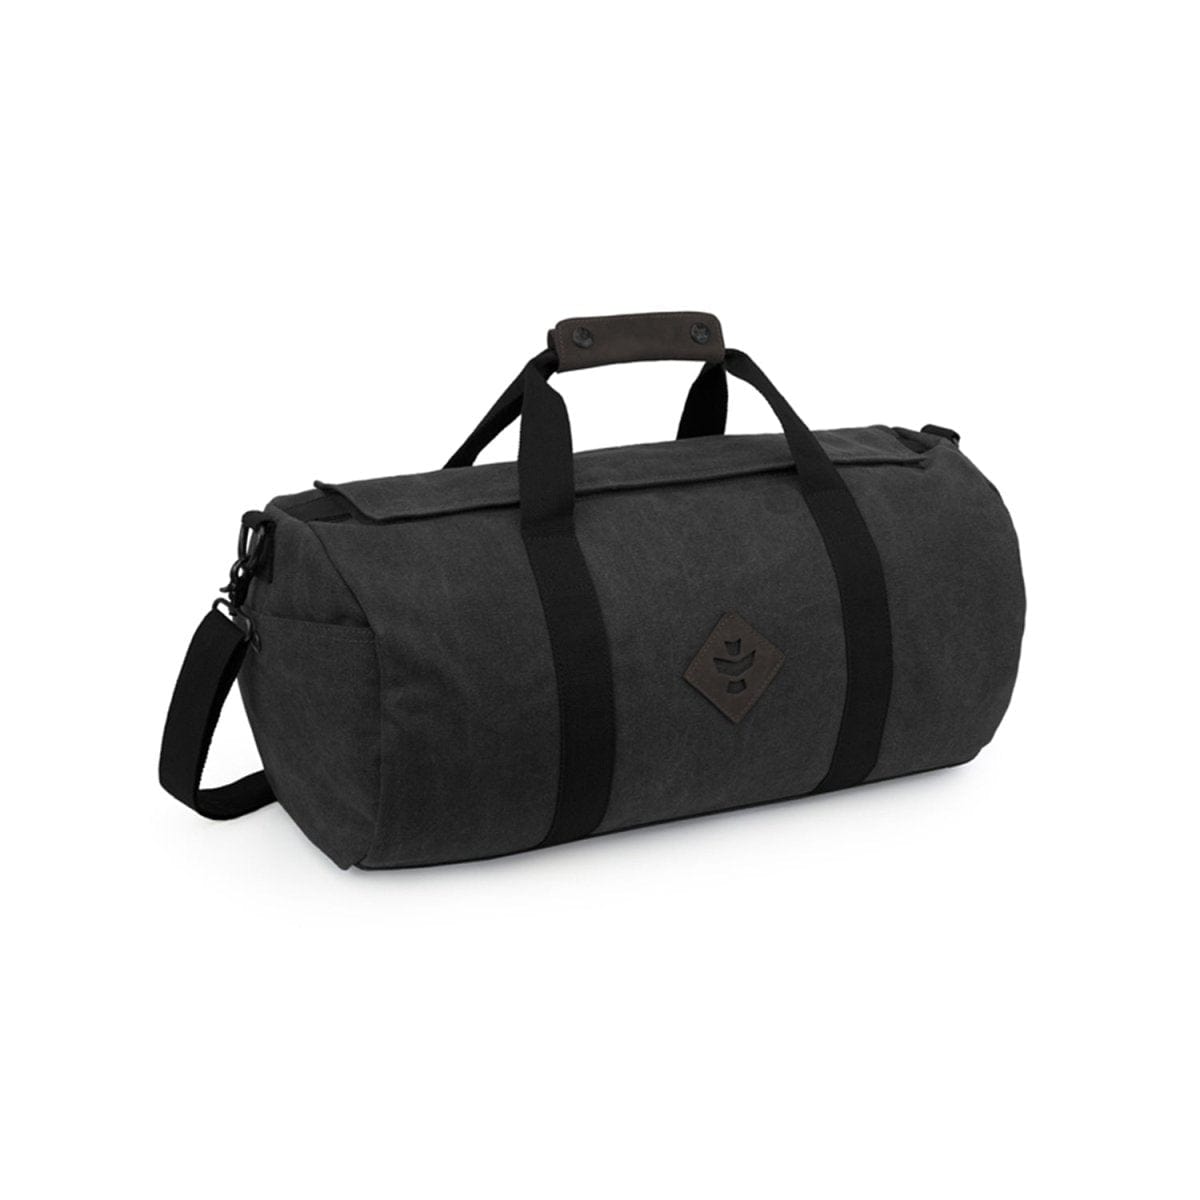 Revelry Supply Travel Bag Smoke The Overnighter - Smell Proof Small Duffle